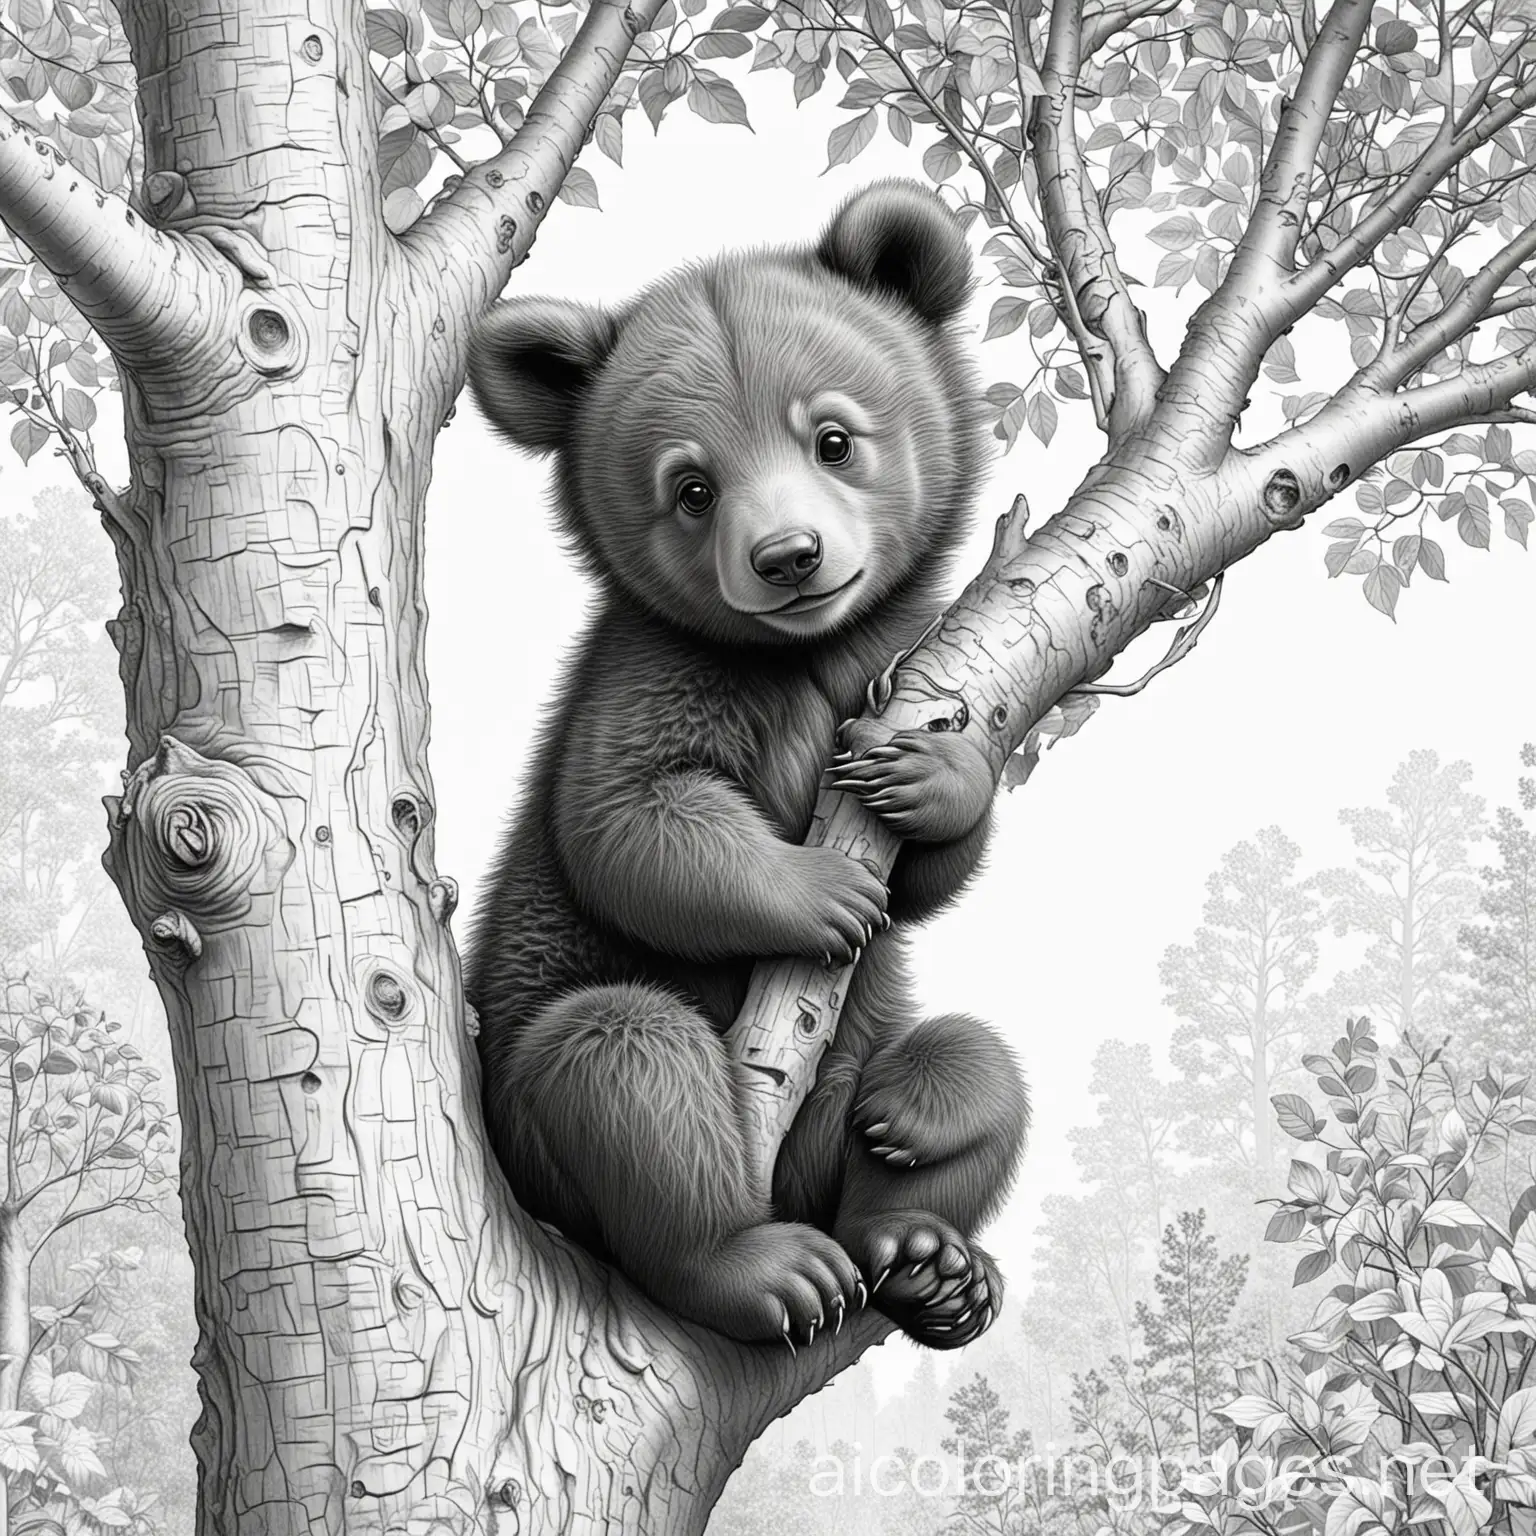 Bear-Cub-Climbing-Tree-Coloring-Page-for-Kids